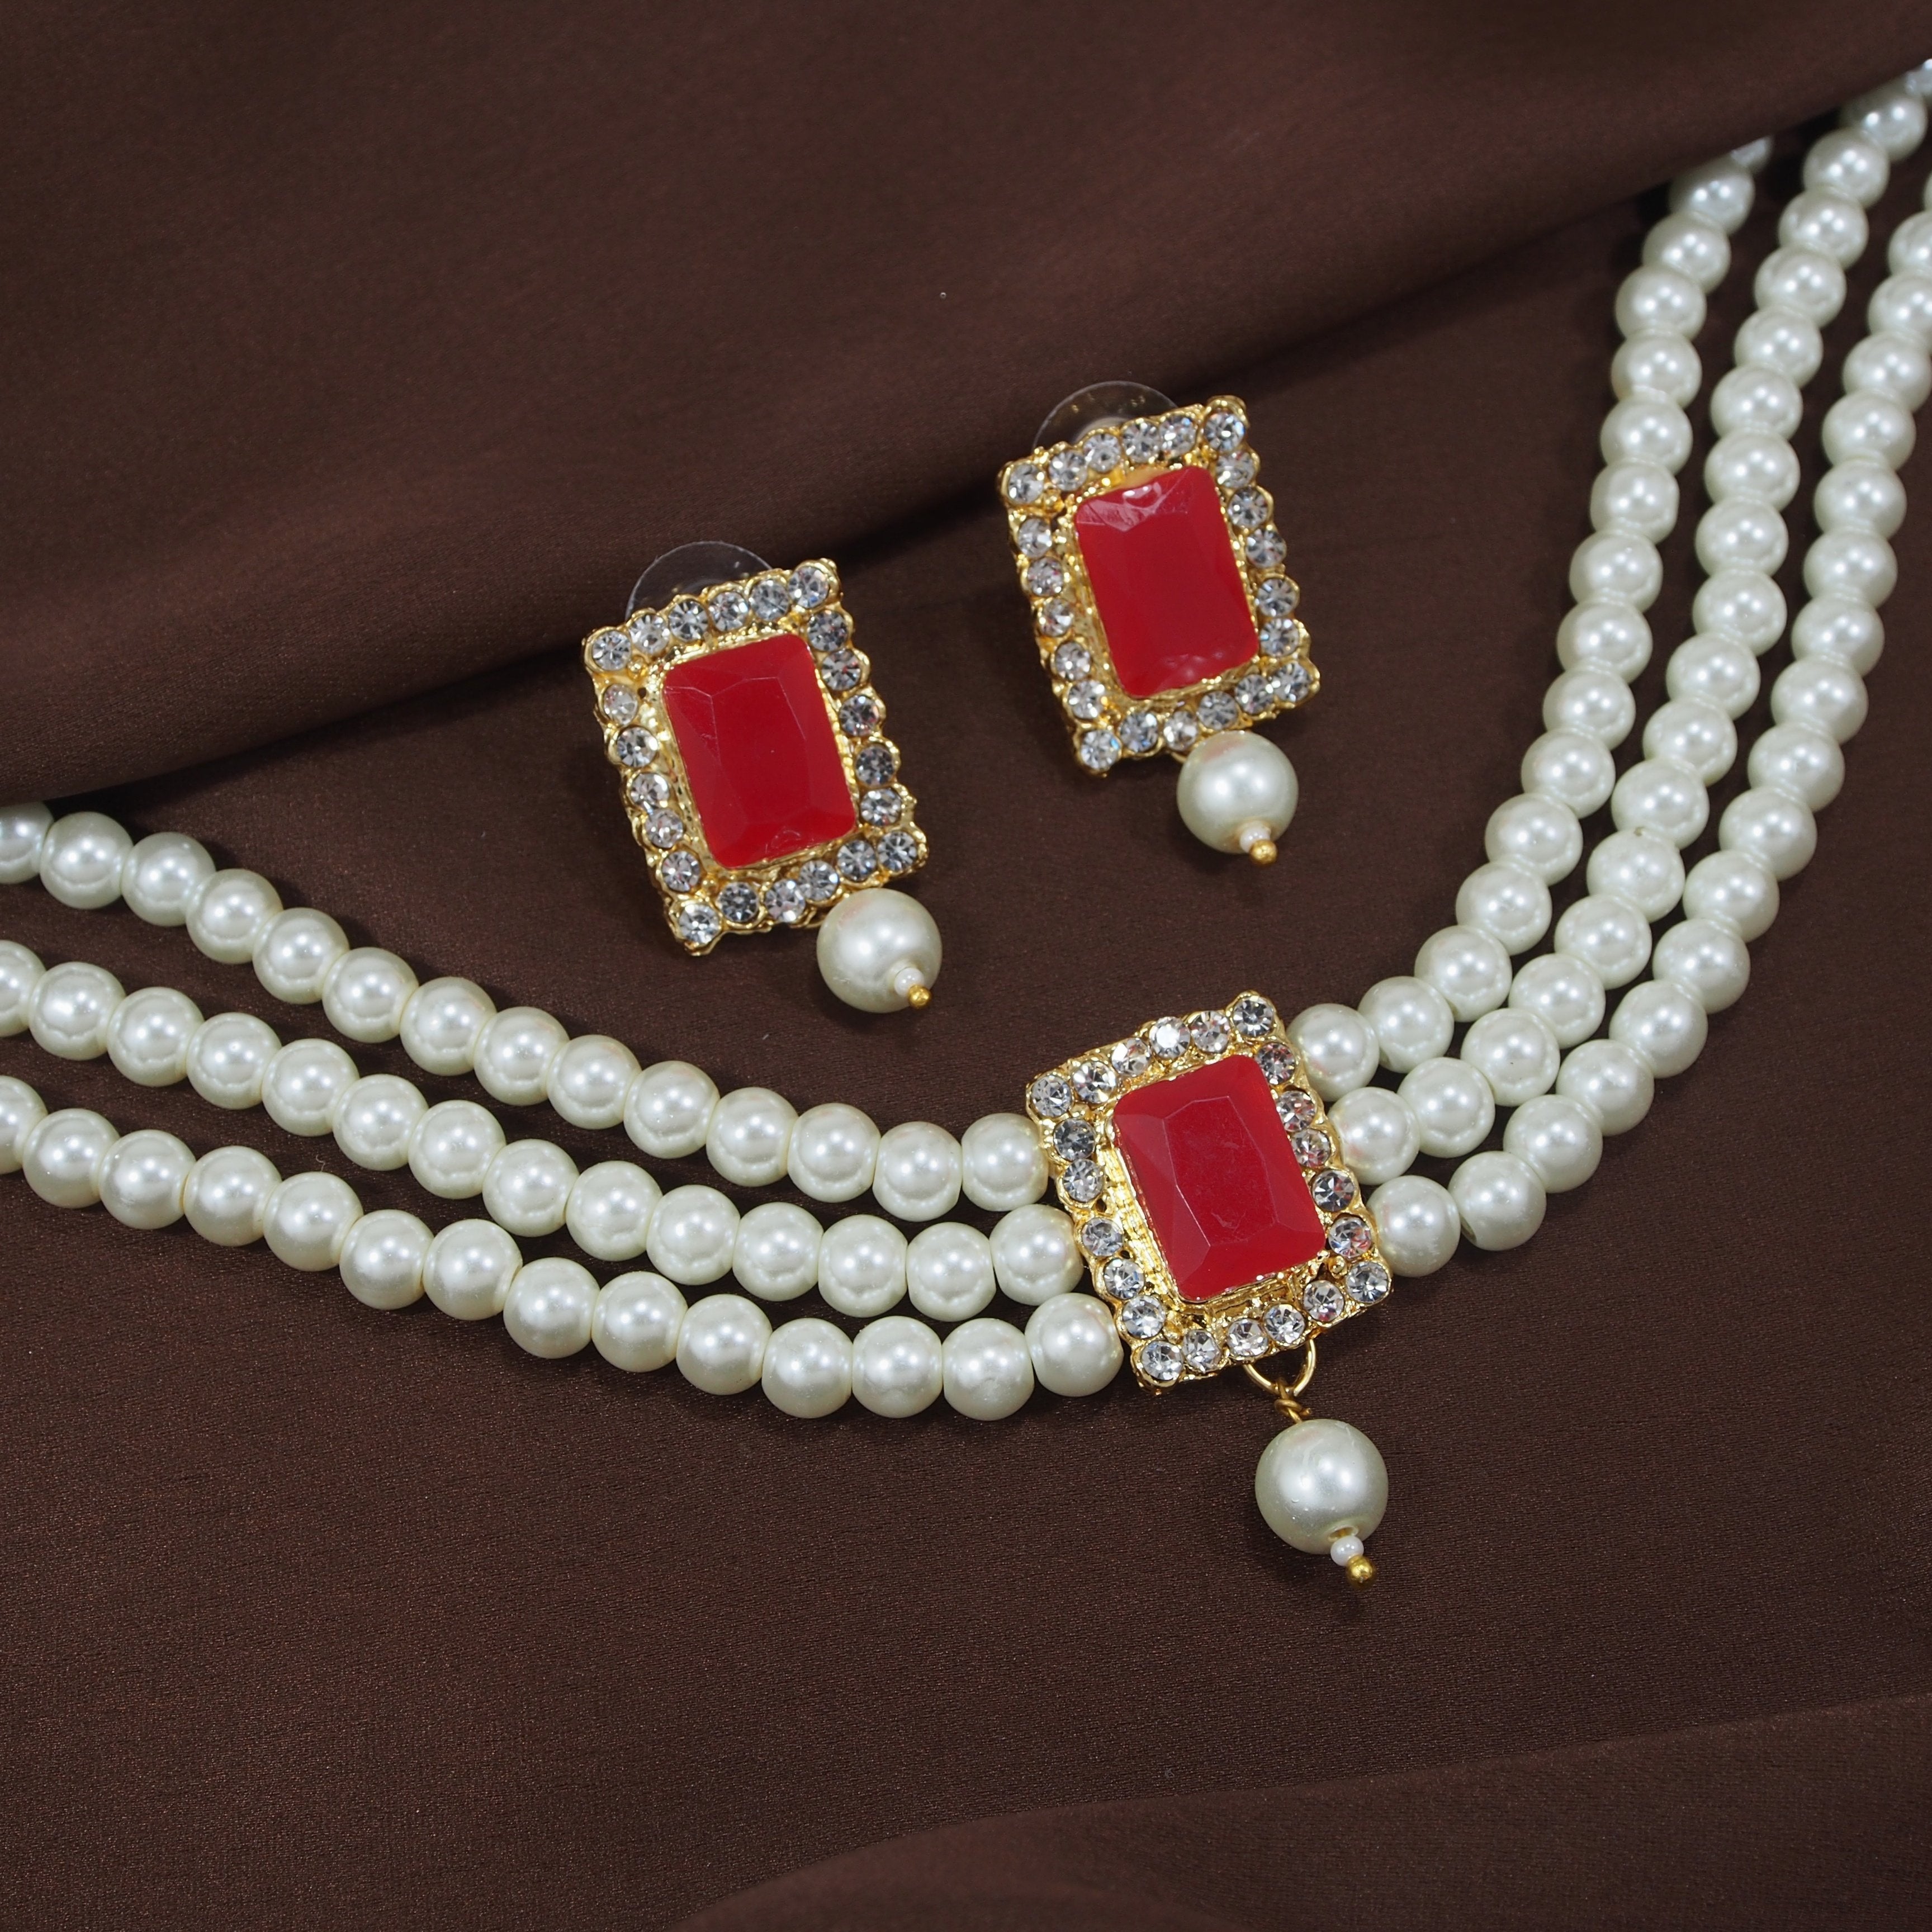 Women's  Gold Plated Traditional Handcrafted Red Stone Studded Pearl Choker Necklace Jewellery Set With Earrings  - i jewels